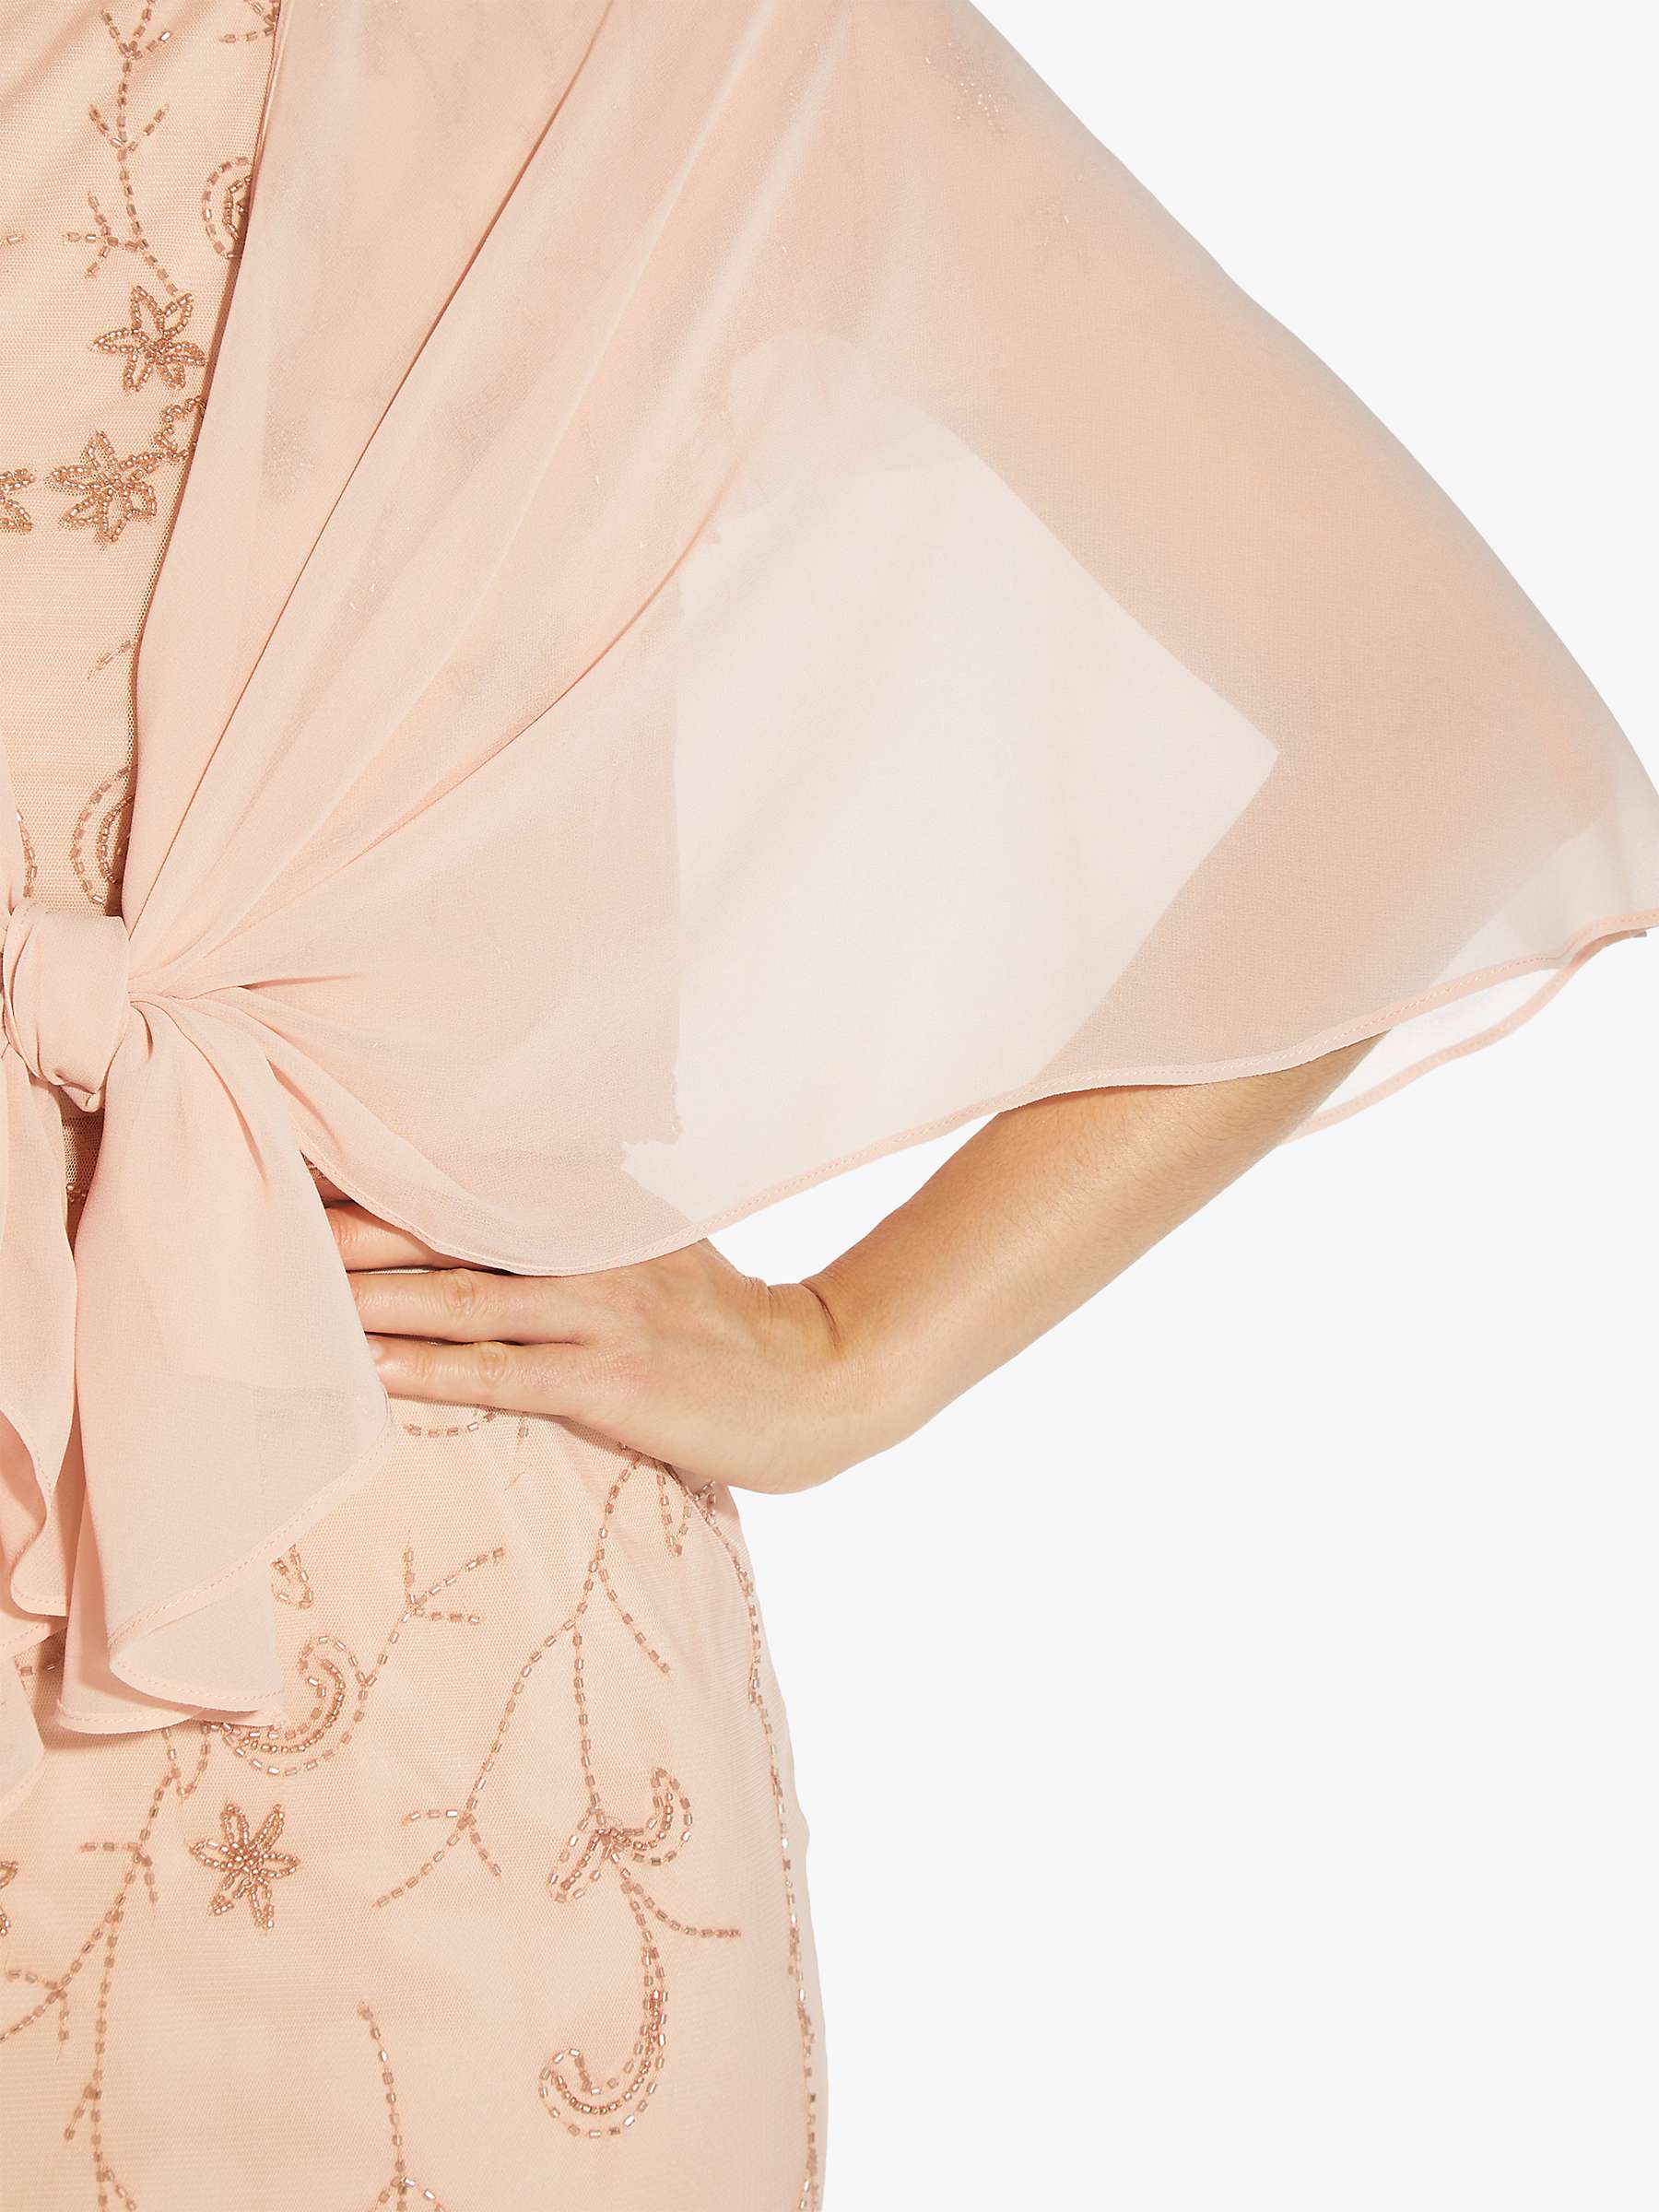 Buy Adrianna Papell Chiffon Cover Up Online at johnlewis.com